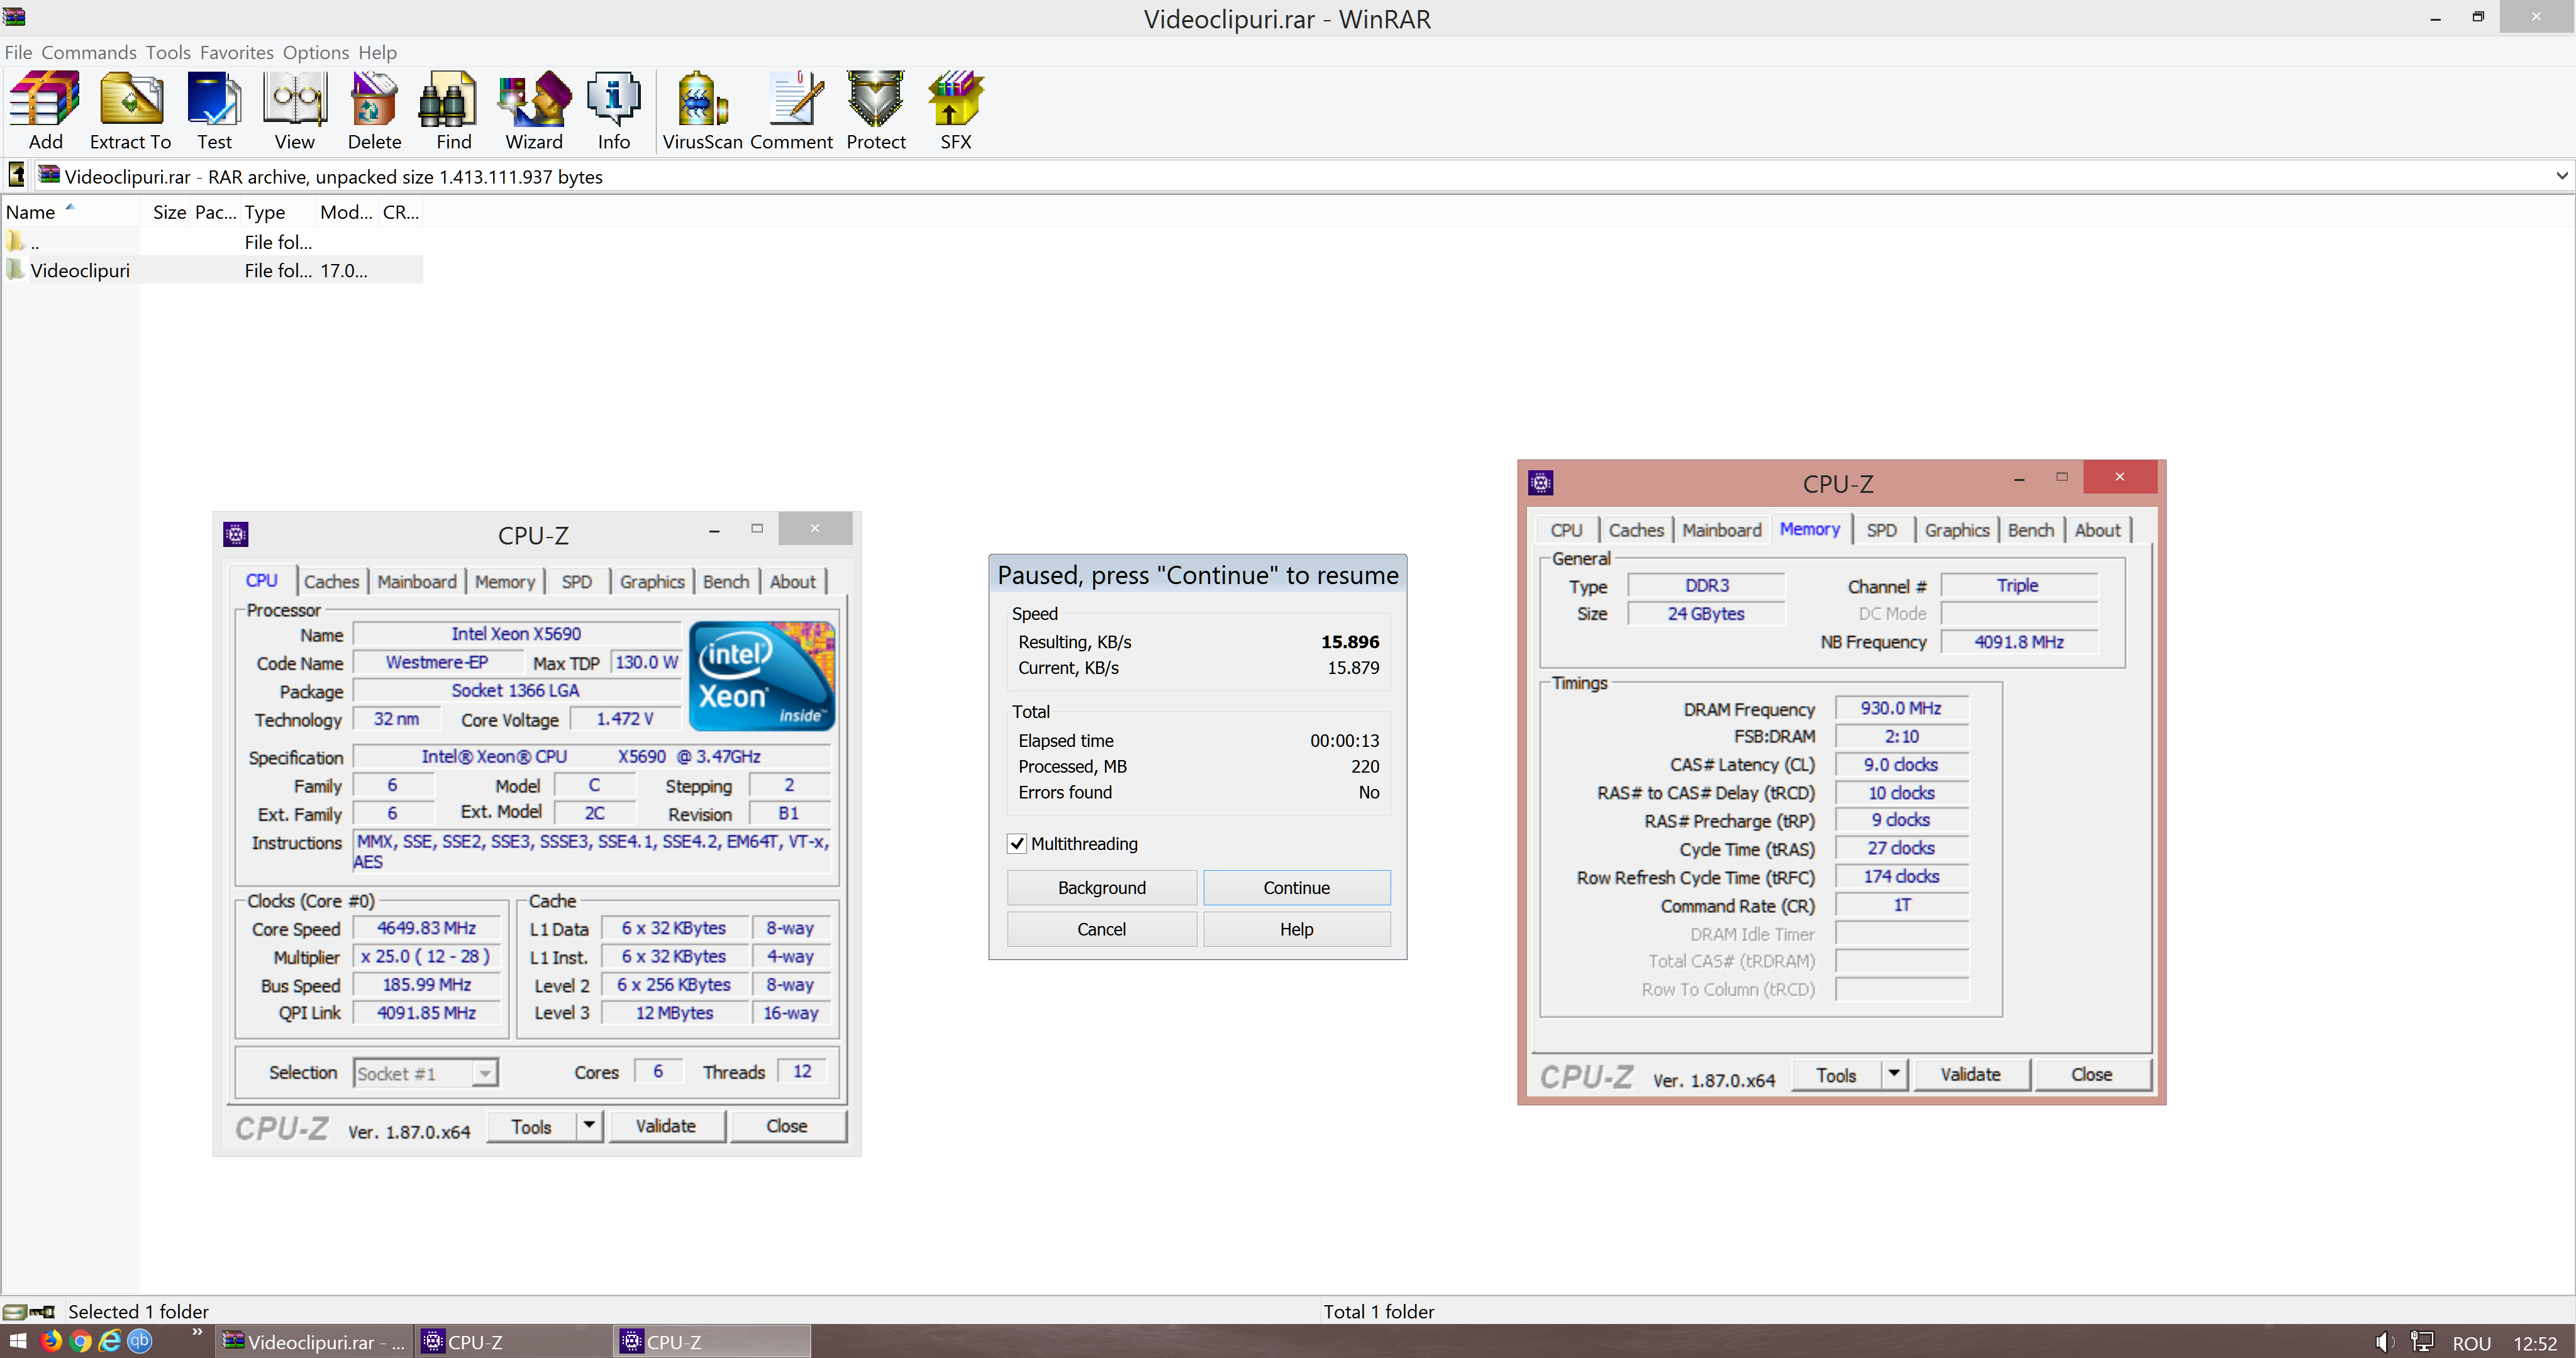 PC/タブレット ノートPC tzatze`s WinRAR (alpha) score: 15896 KB/s with a Xeon X5690